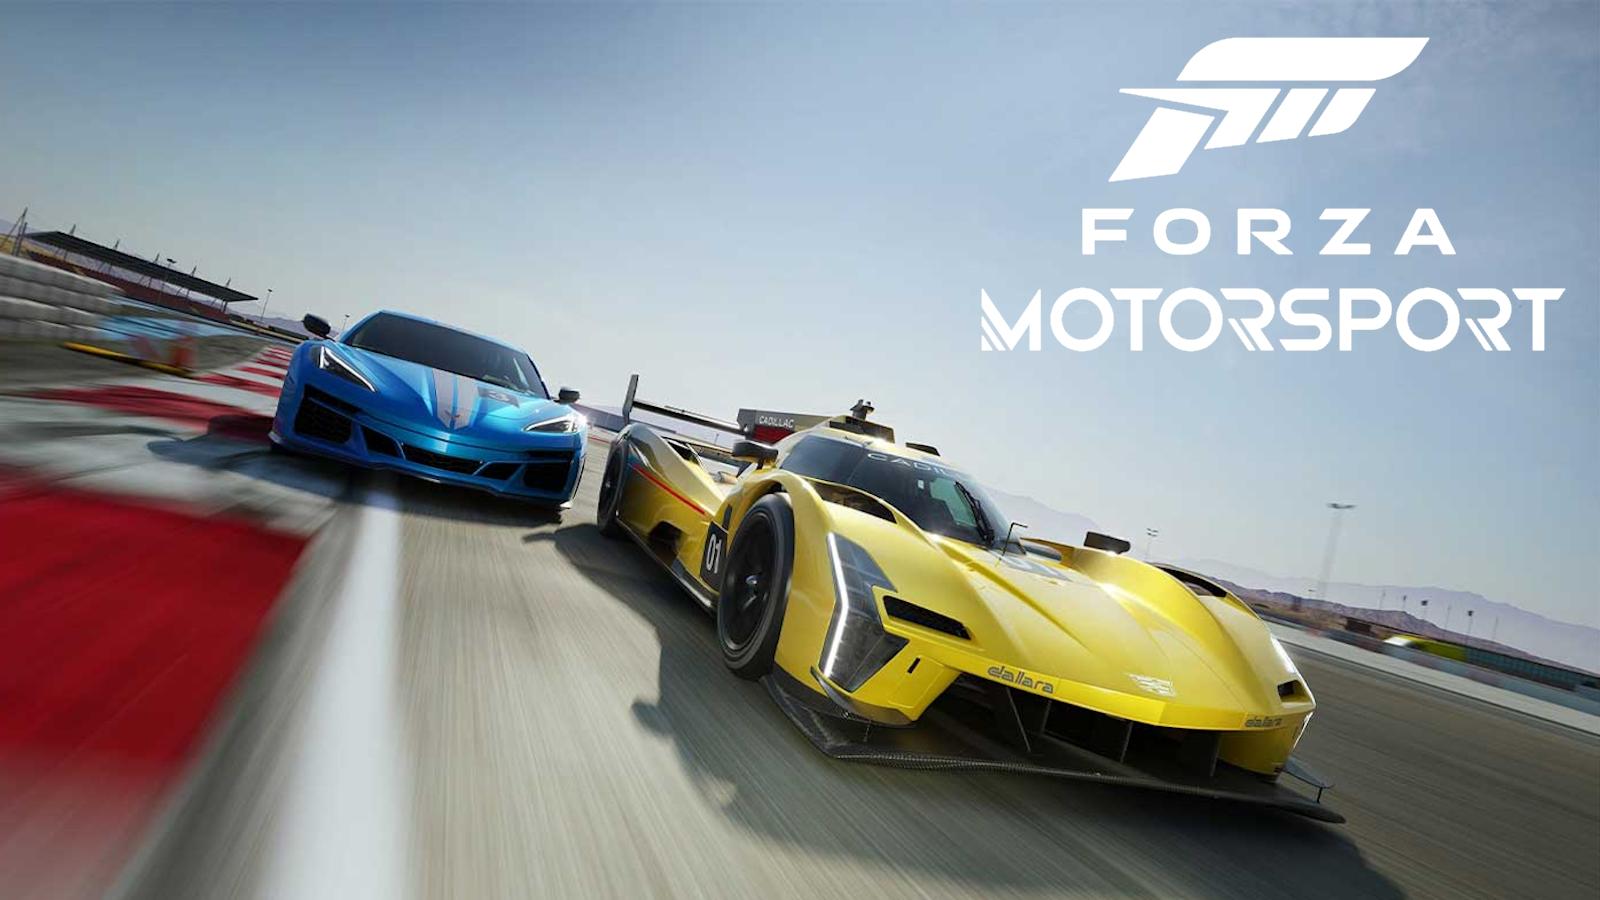 Forza Horizon 6 is reportedly in development: Possible release